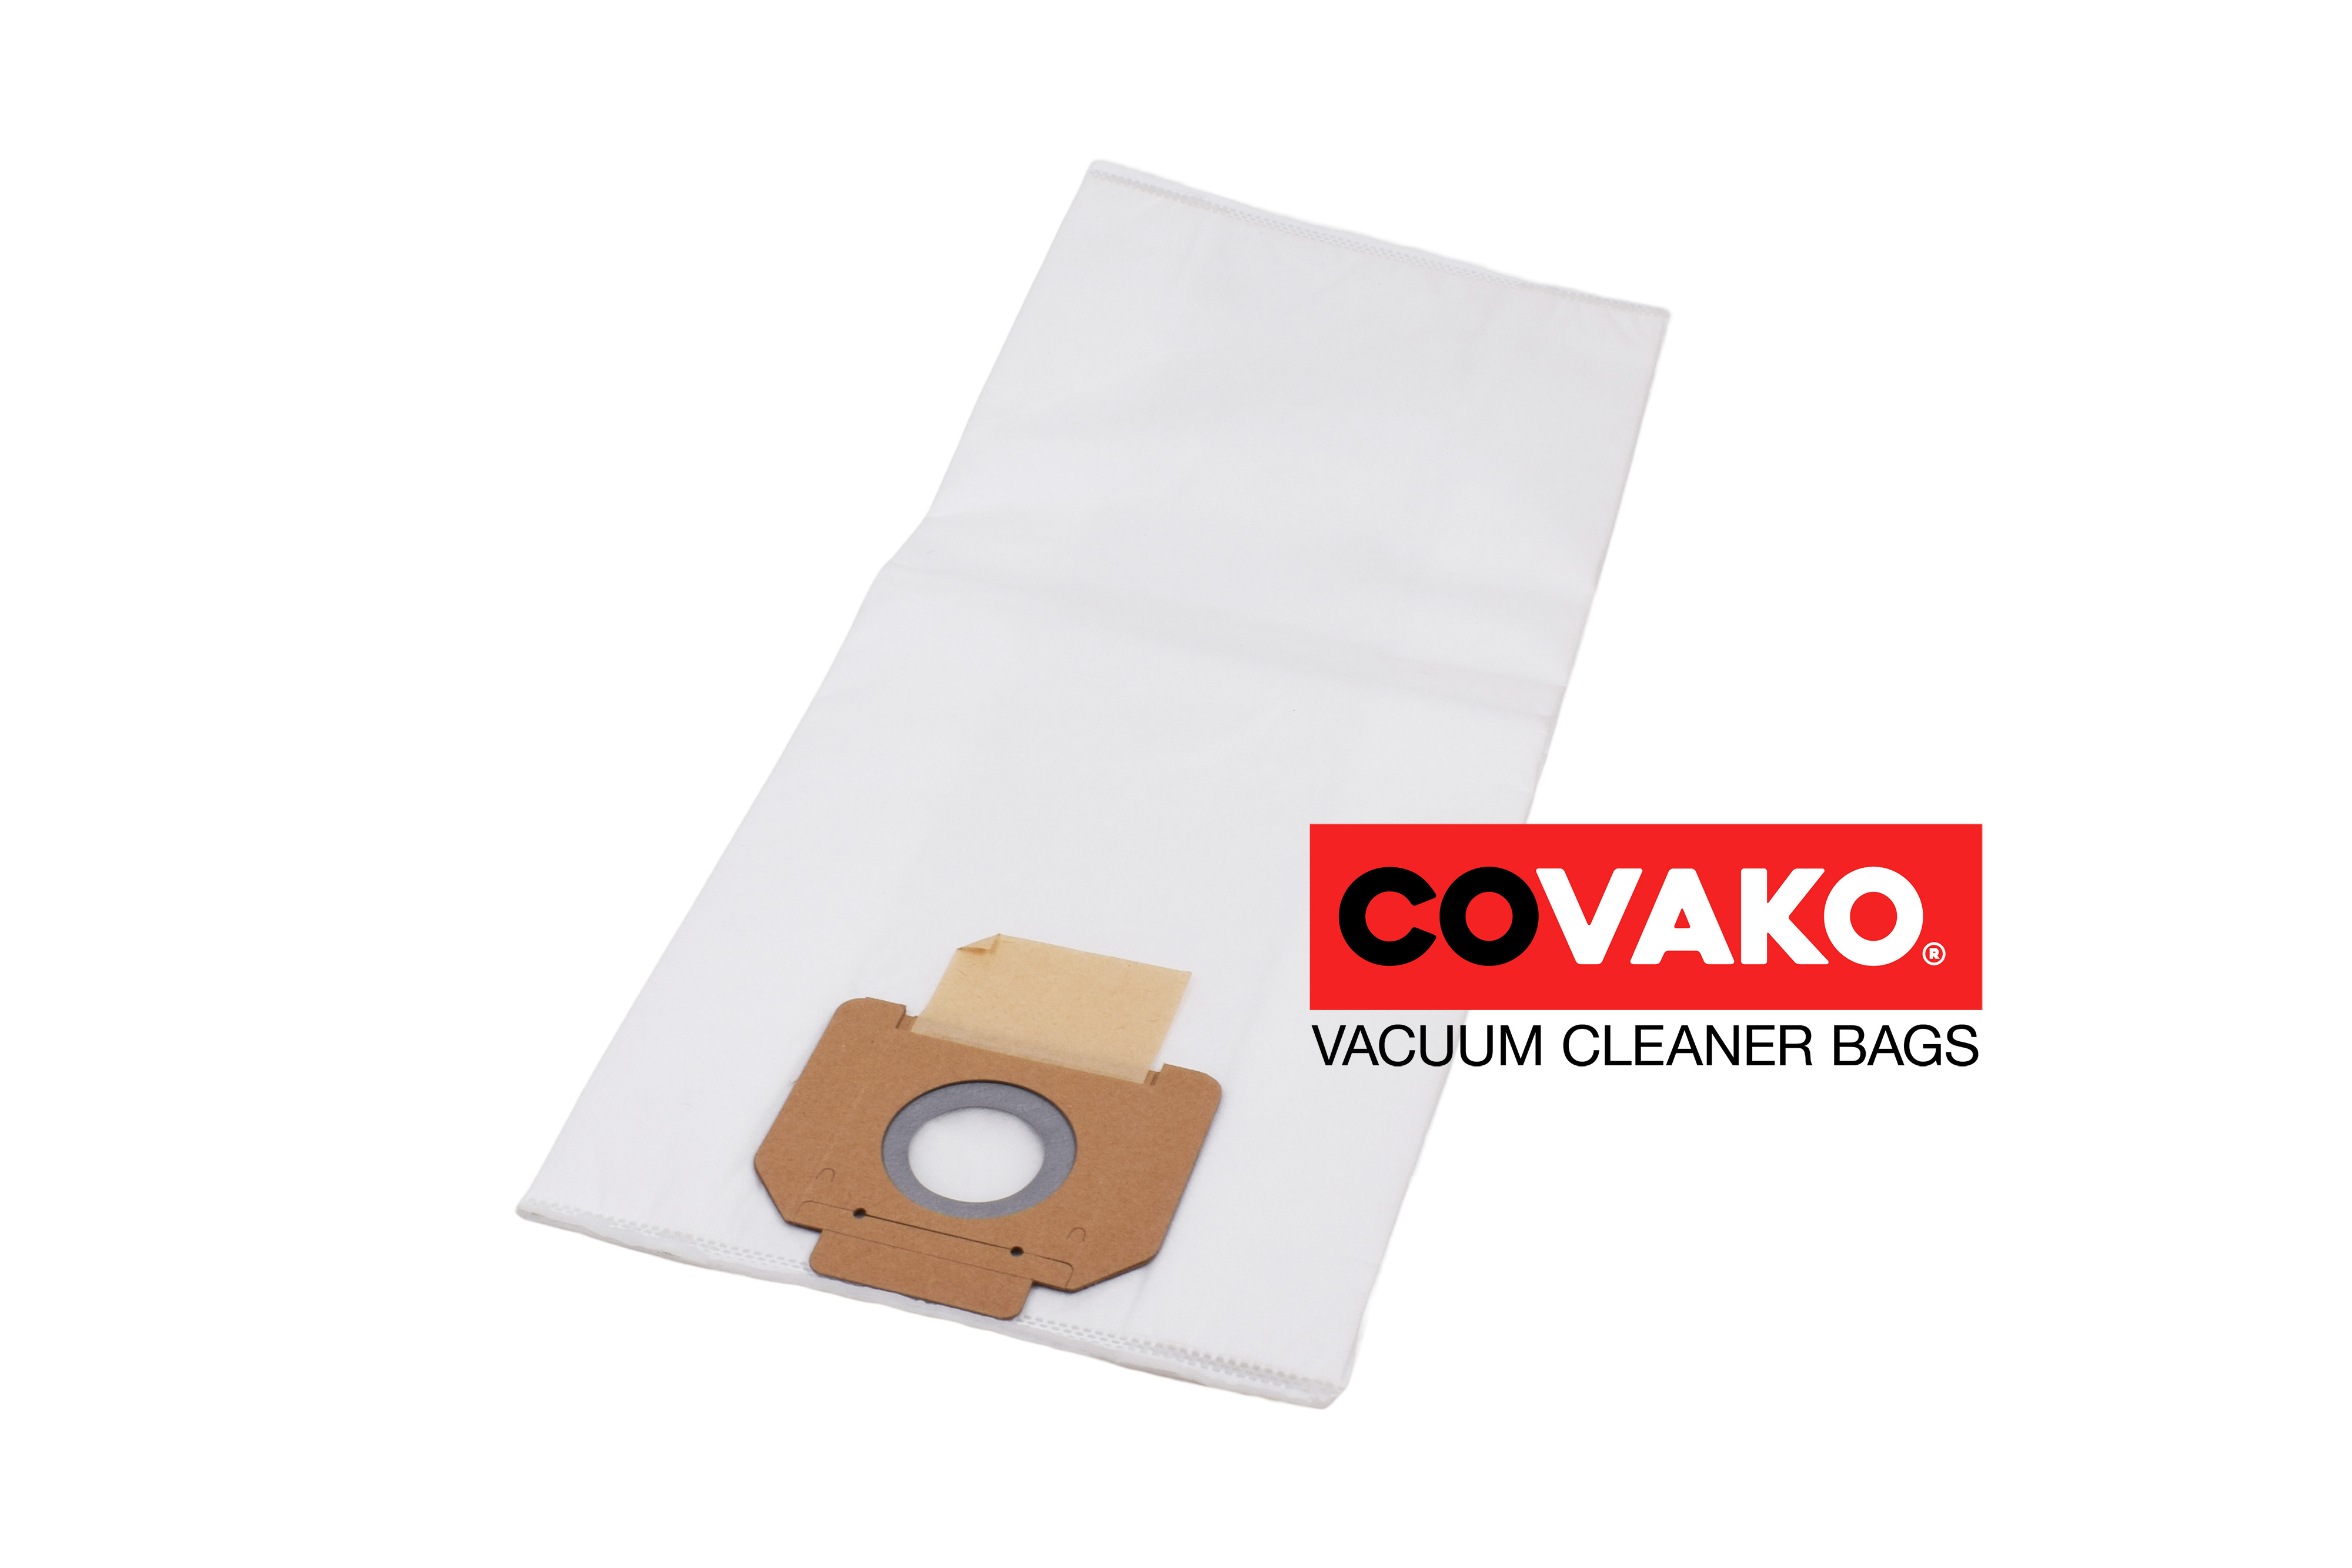 Einhell TE-VC 2340 SA / Synthesis - Einhell vacuum cleaner bags